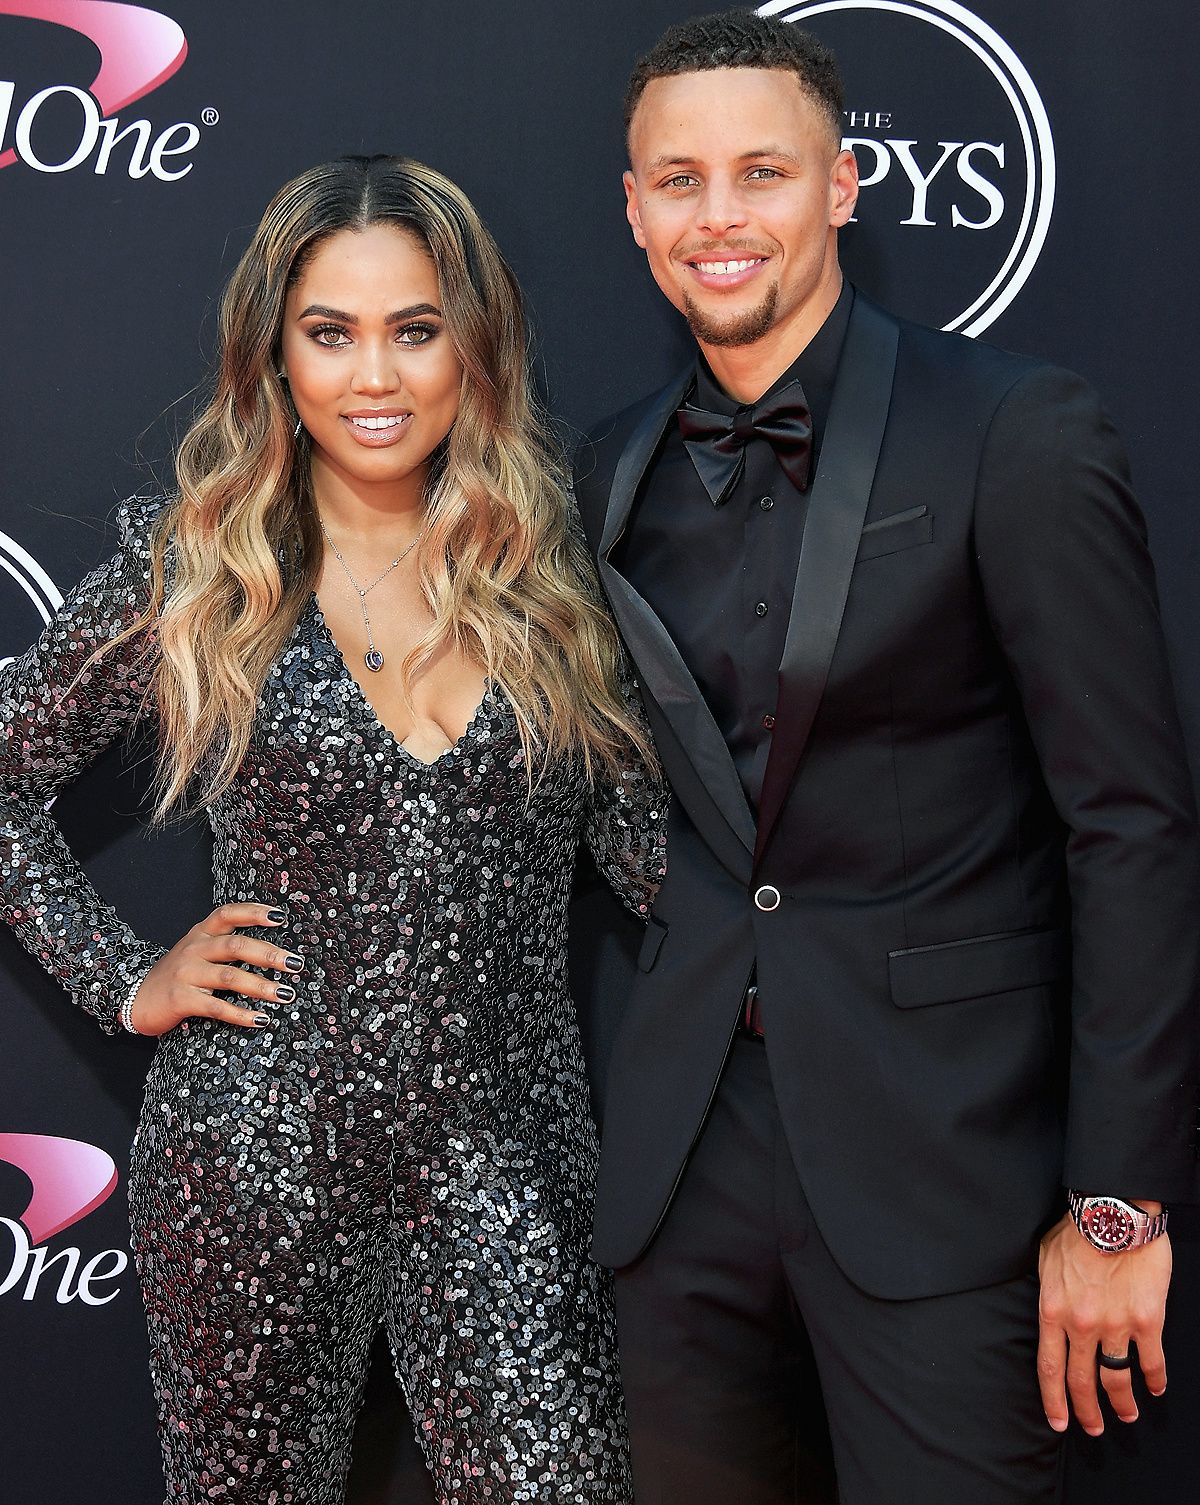 Send Nudes Heres How Ayesha Curry and 4 Other Celebs Keep Their Relationships Spicy pic image